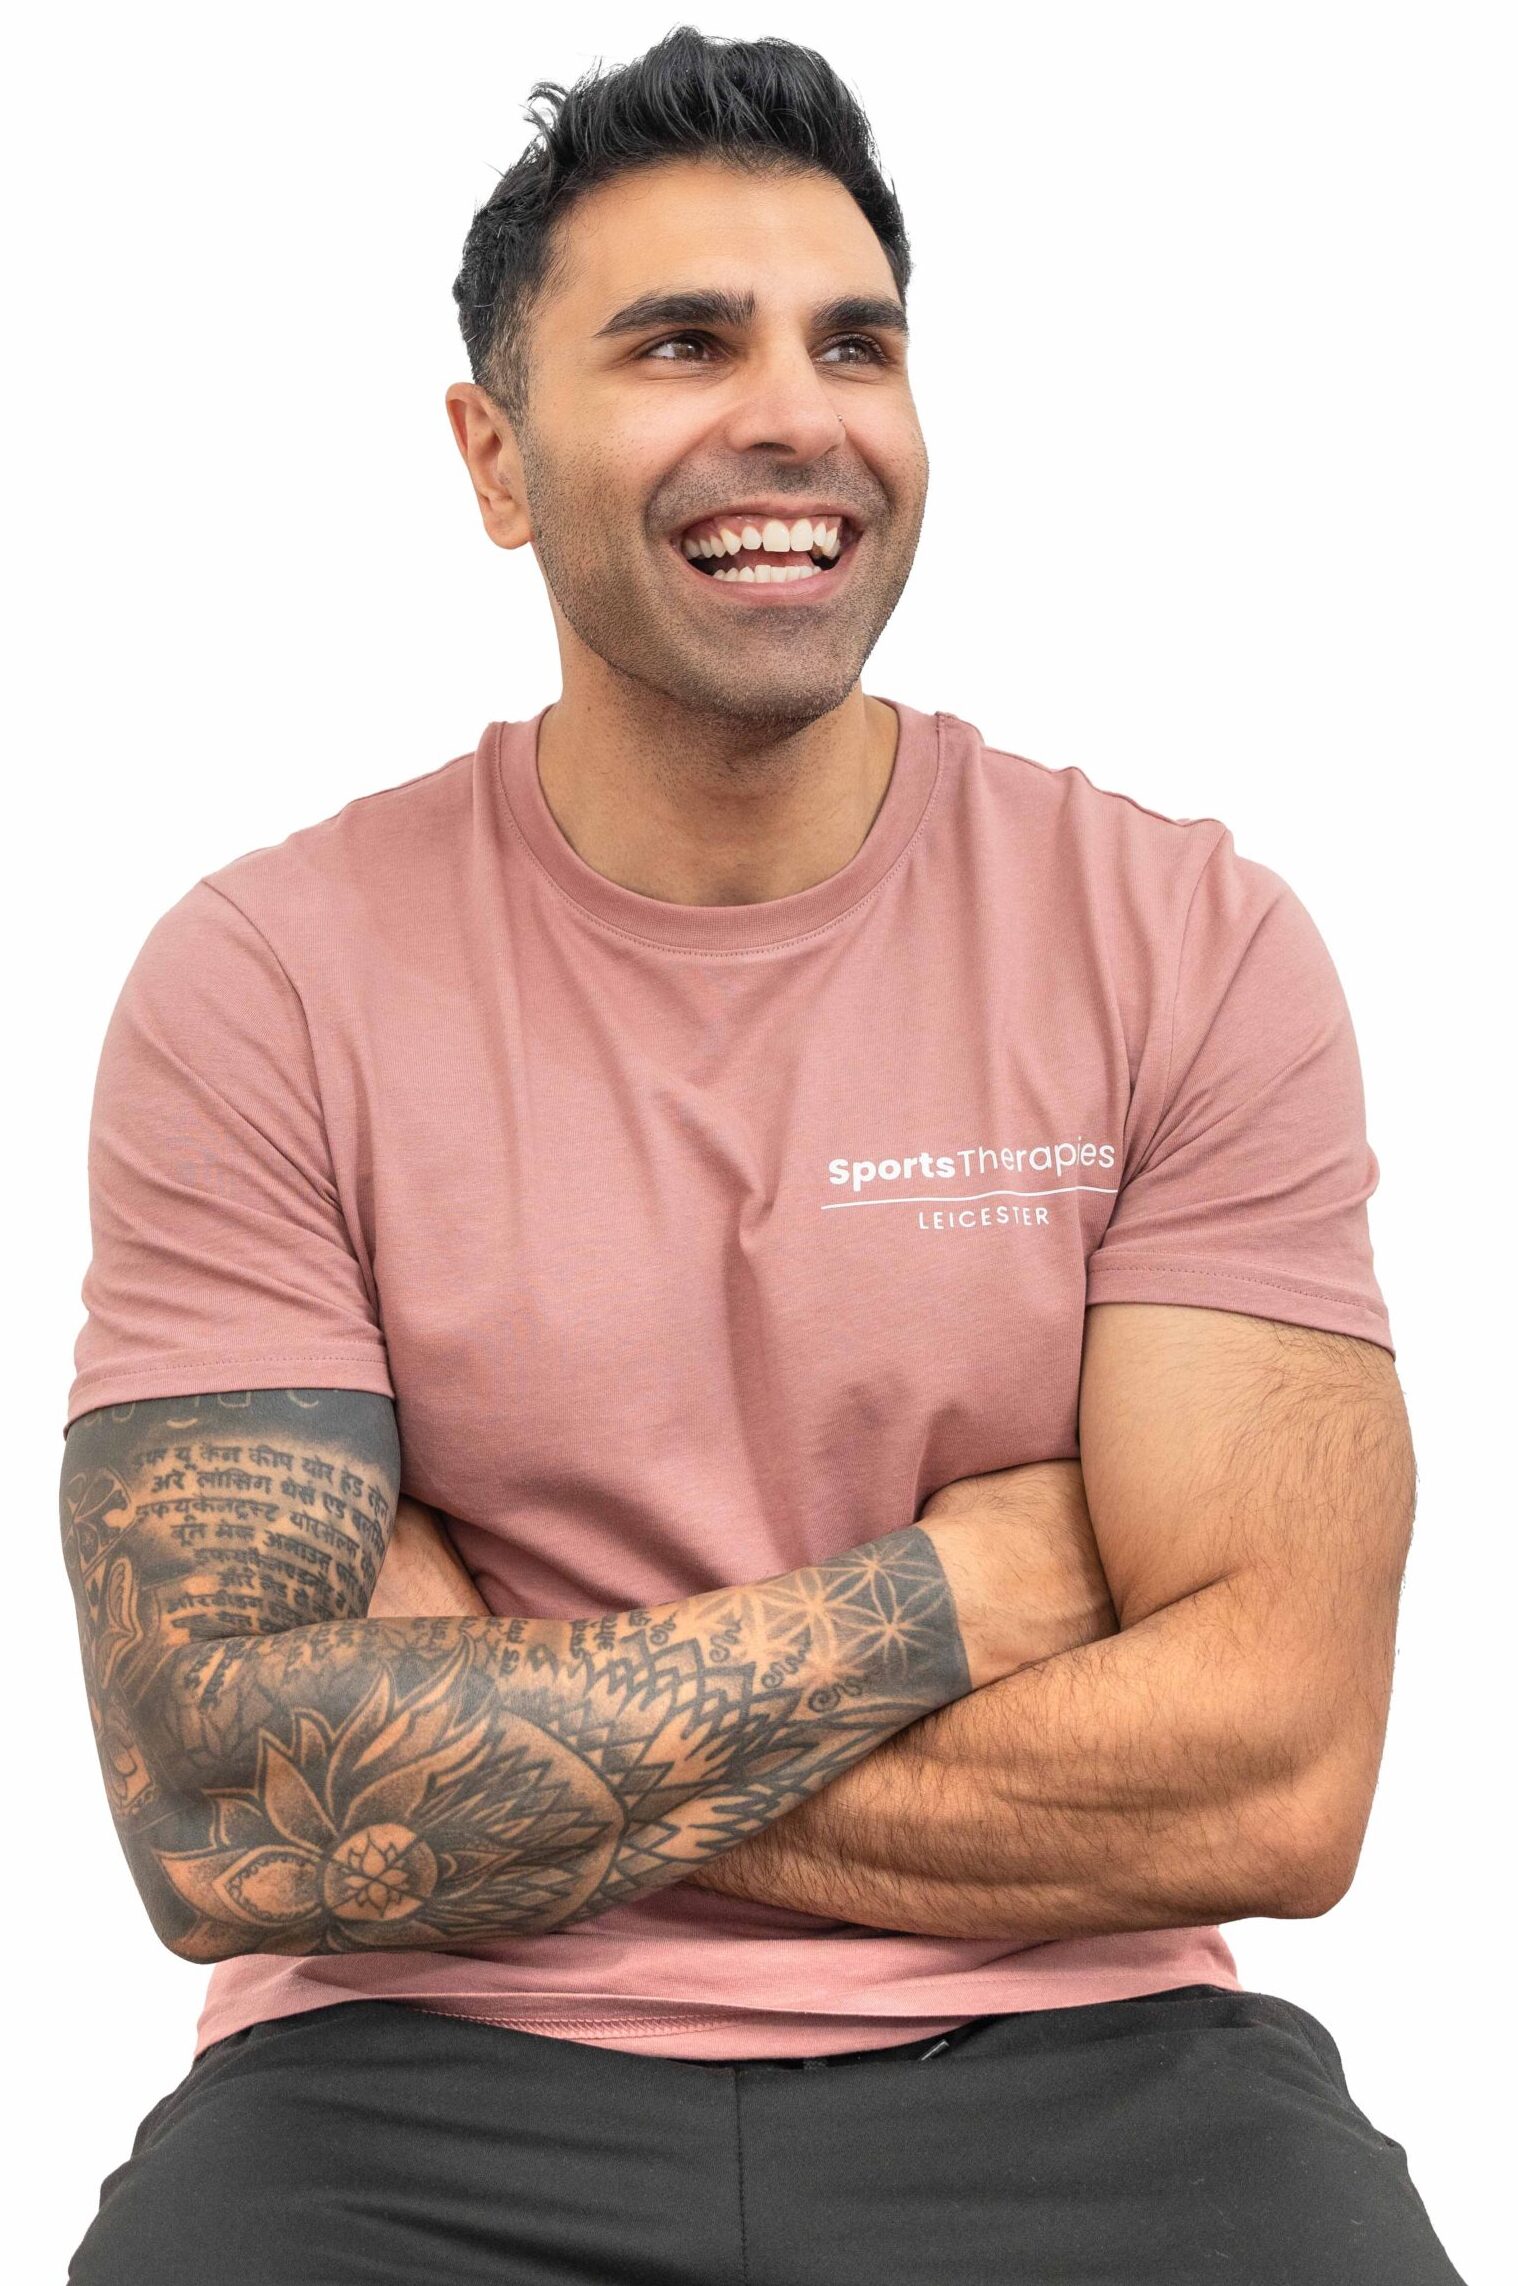 Portrait of Guj, owner of Sports Therapies Leicester